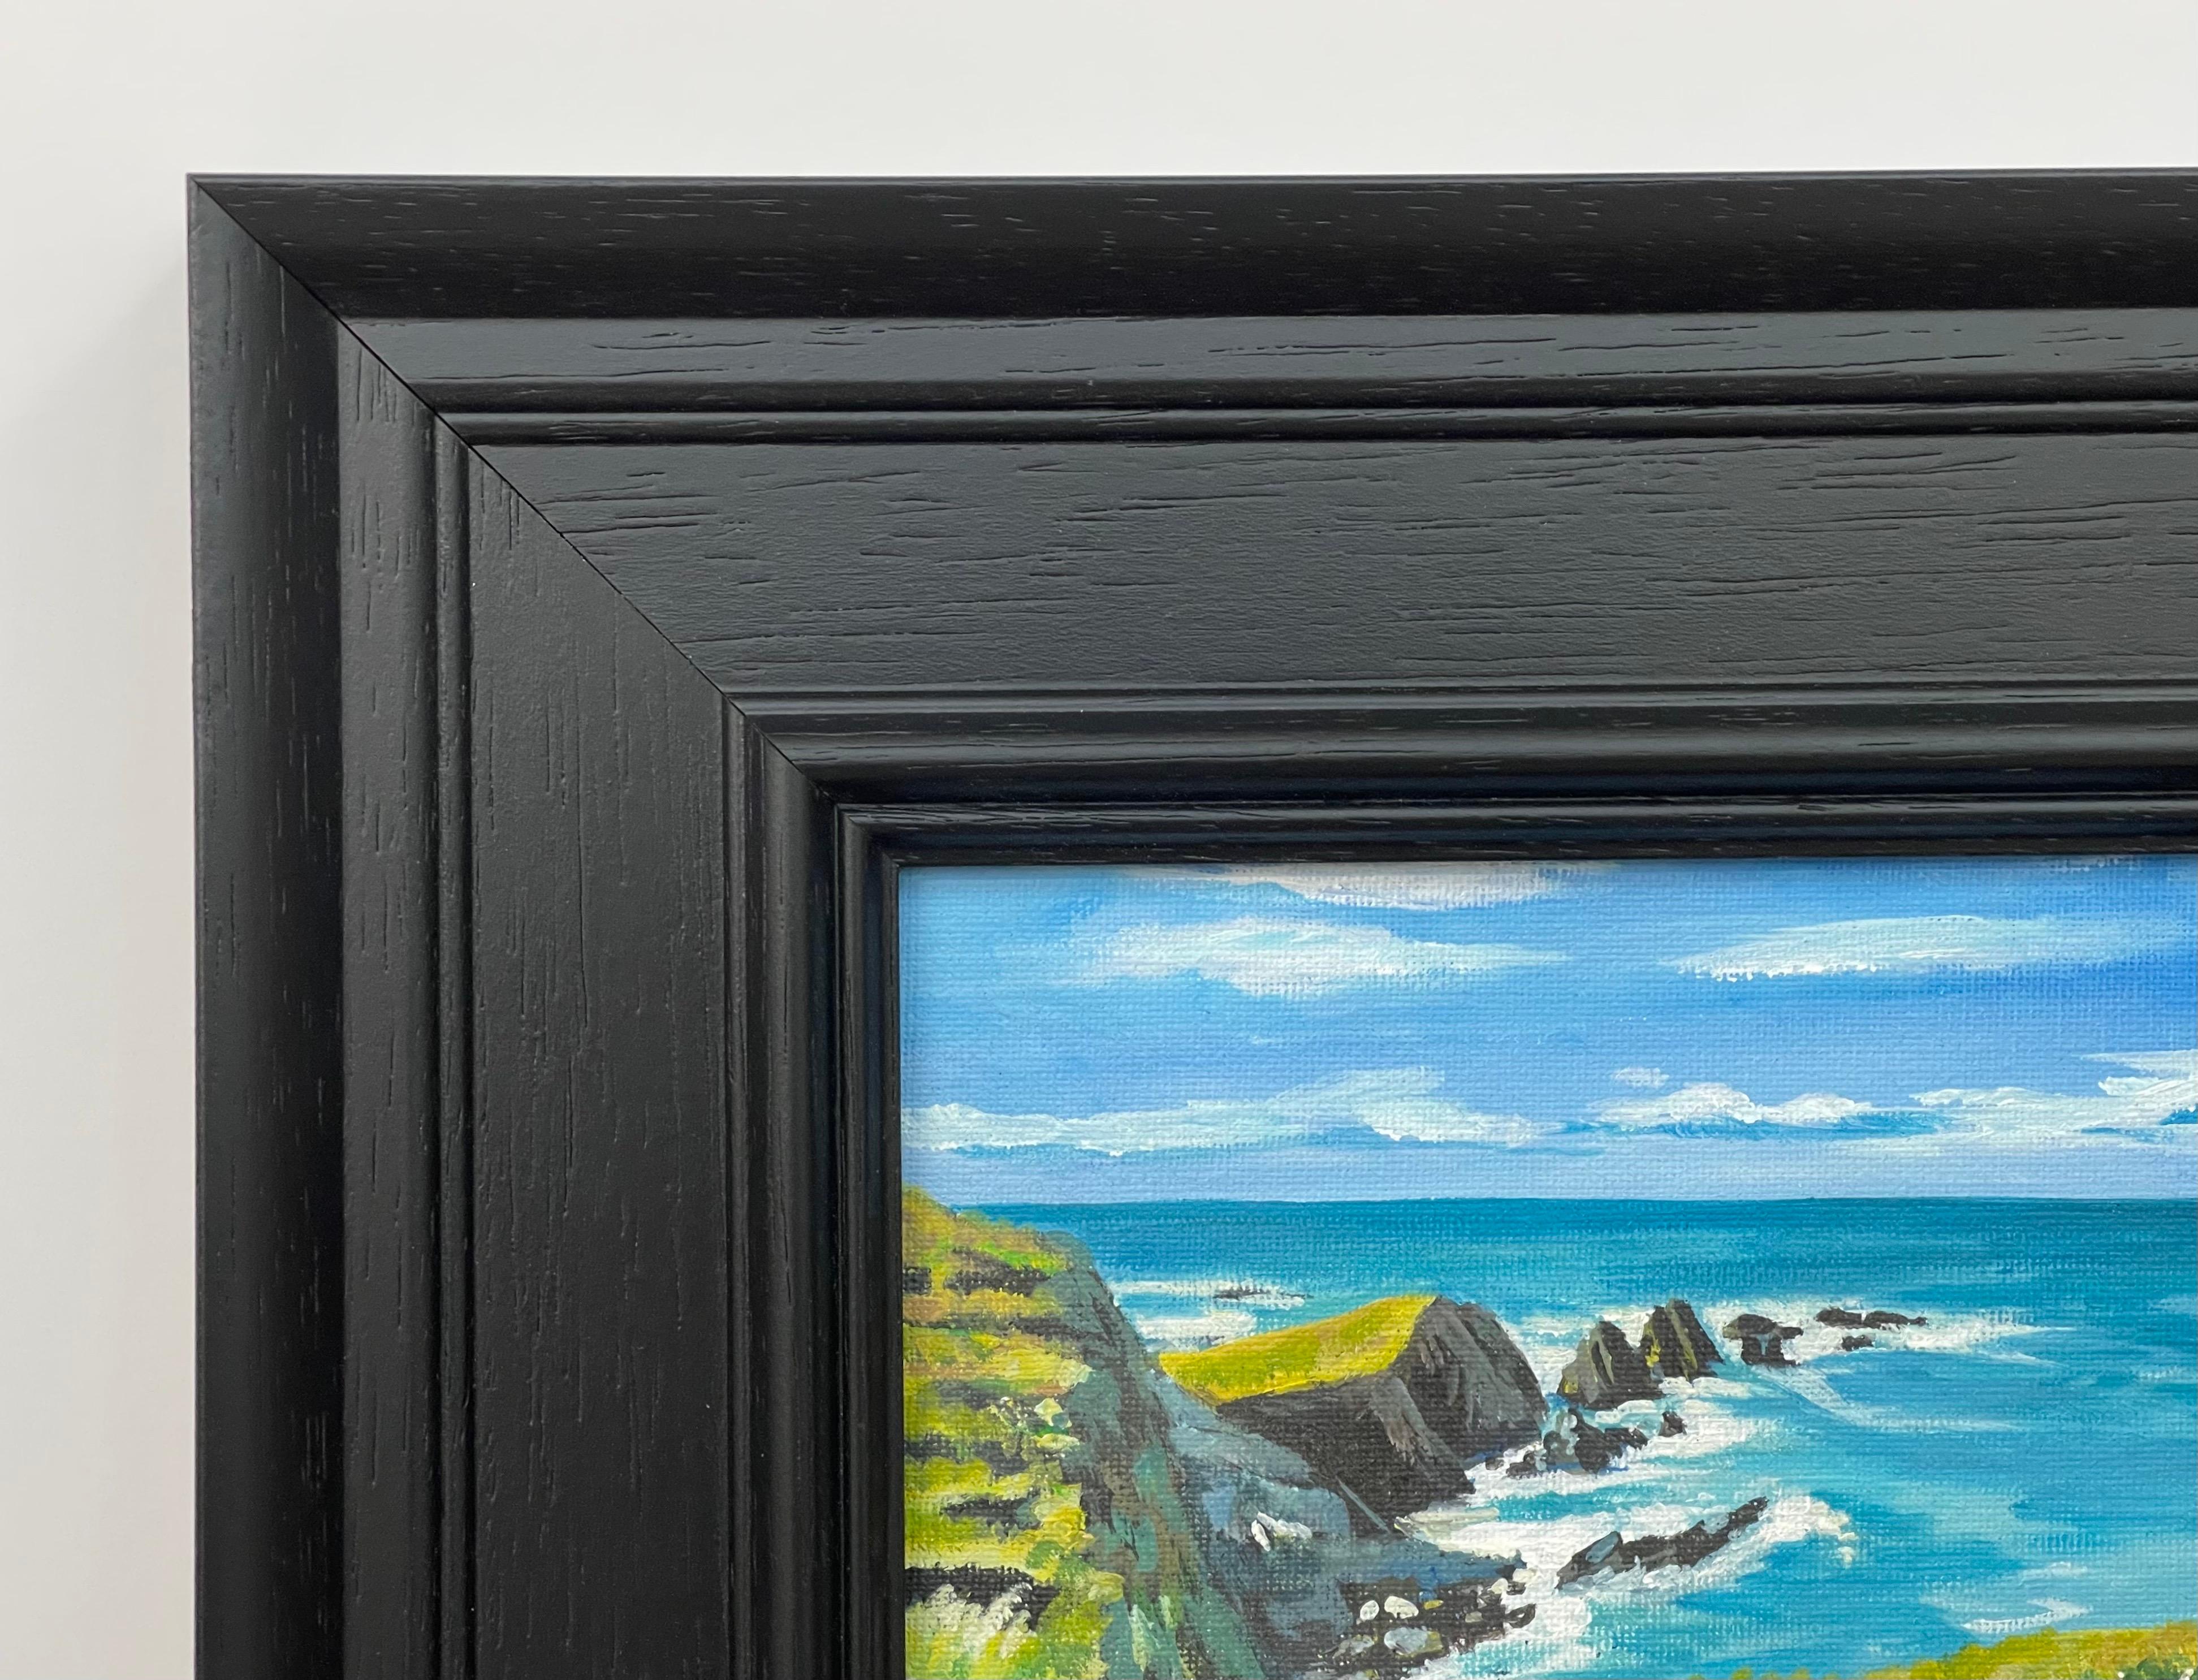 Miniature Landscape Study of Hartland Point on the Devon Coastline, England, by Contemporary British Artist Angela Wakefield

Art measures 7 x 5 inches
Frame measures 13 x 11 inches 

Angela Wakefield has twice been on the front cover of ‘Art of